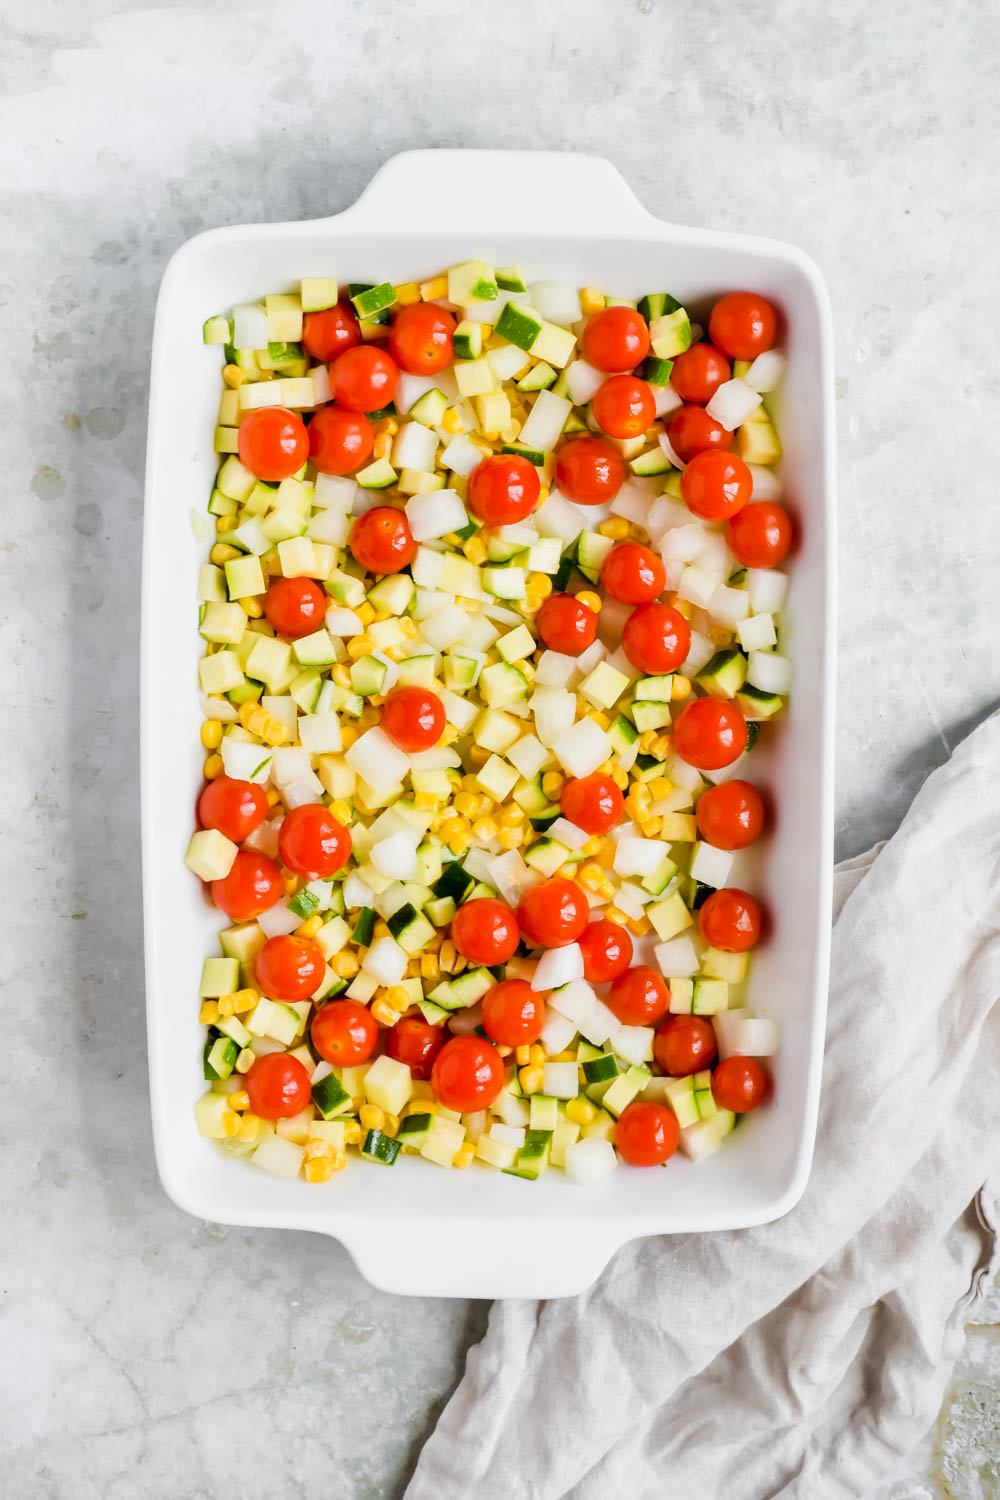 uncooked chopped zucchini, onion, corn, and baby tomatoes in white baking dish on white background.